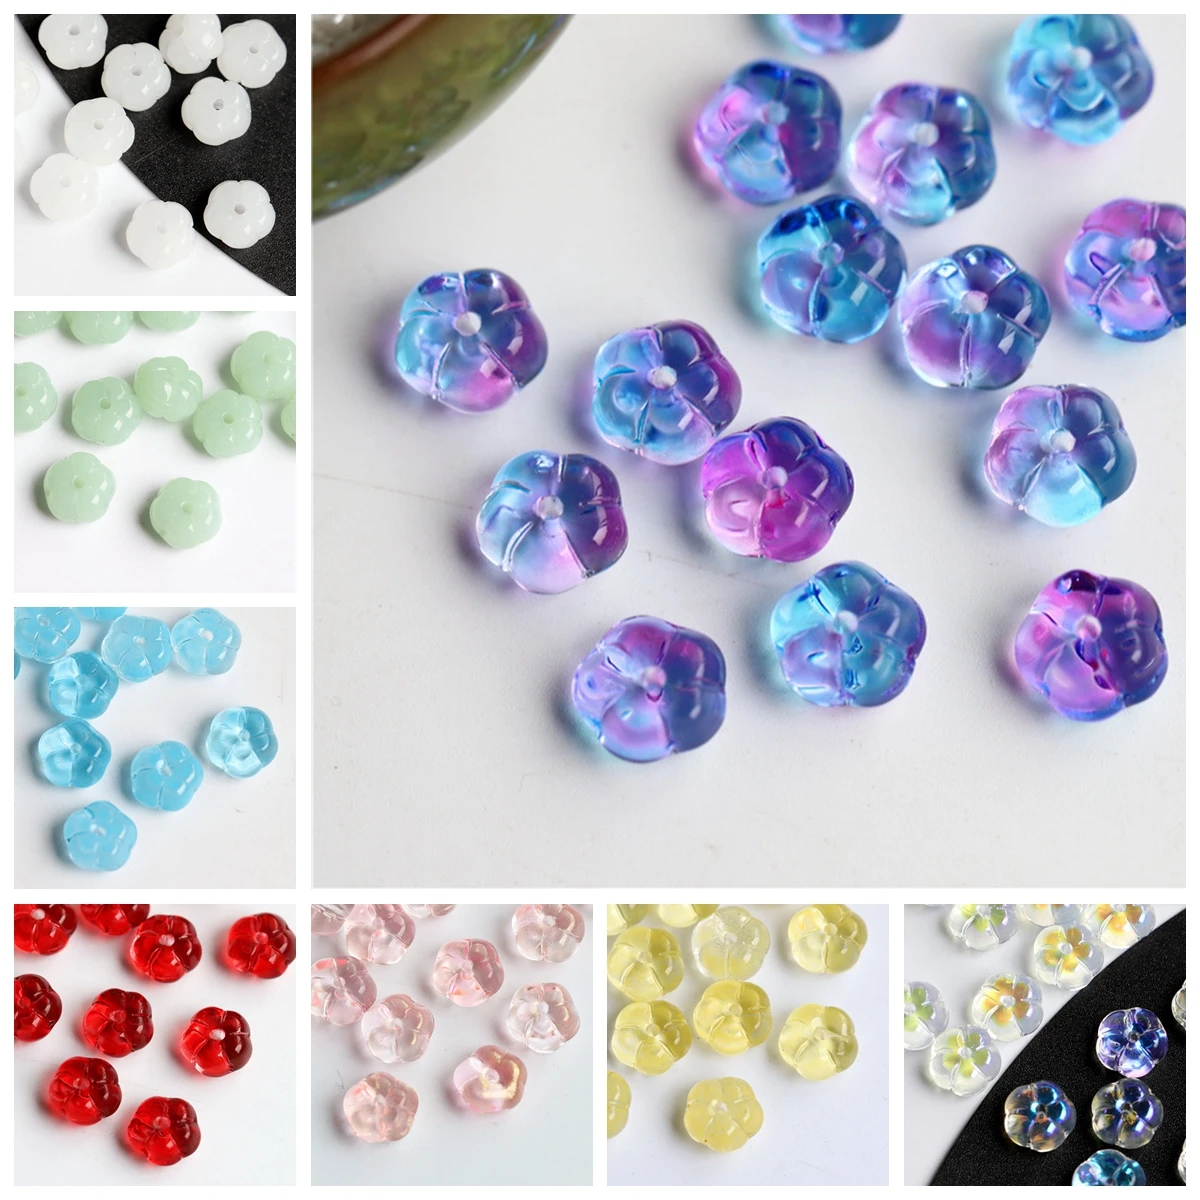 10pcs 9.5mm Flat Round Flower Pumpkin Shape Crystal Lampwork Glass Loose Beads for Jewelry Making